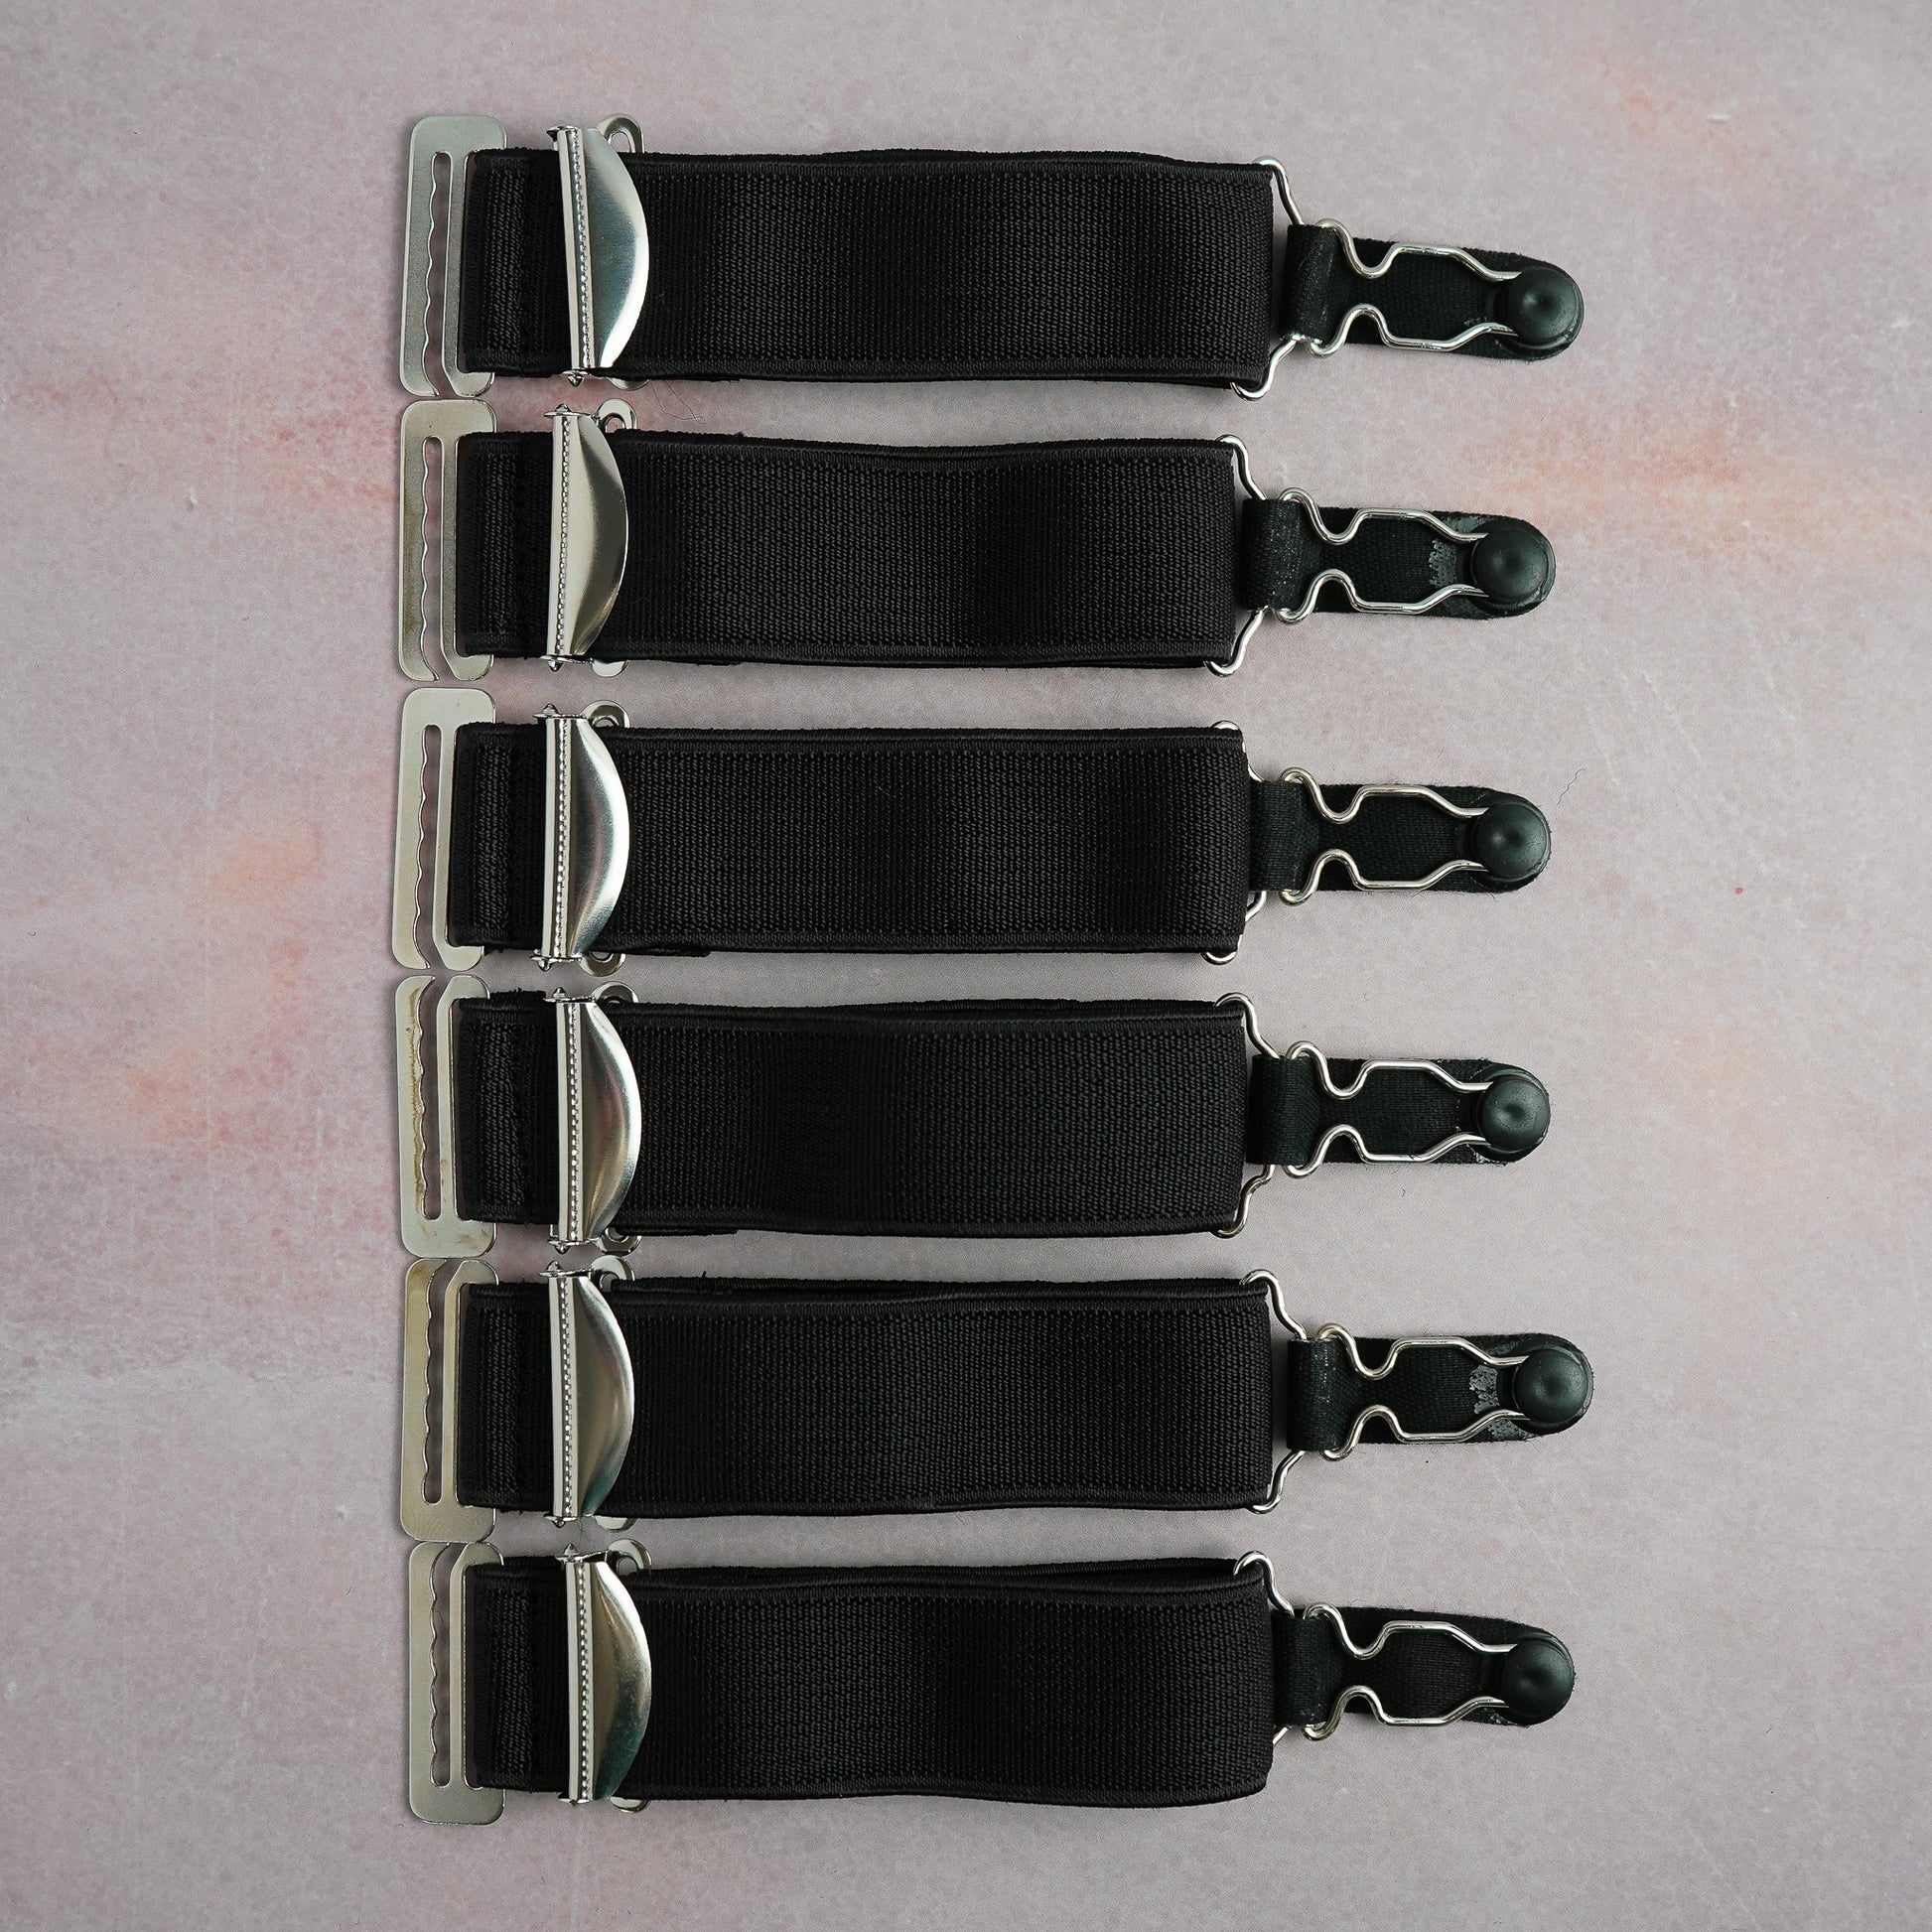 A set of 6 extra wide black suspenders with hooks